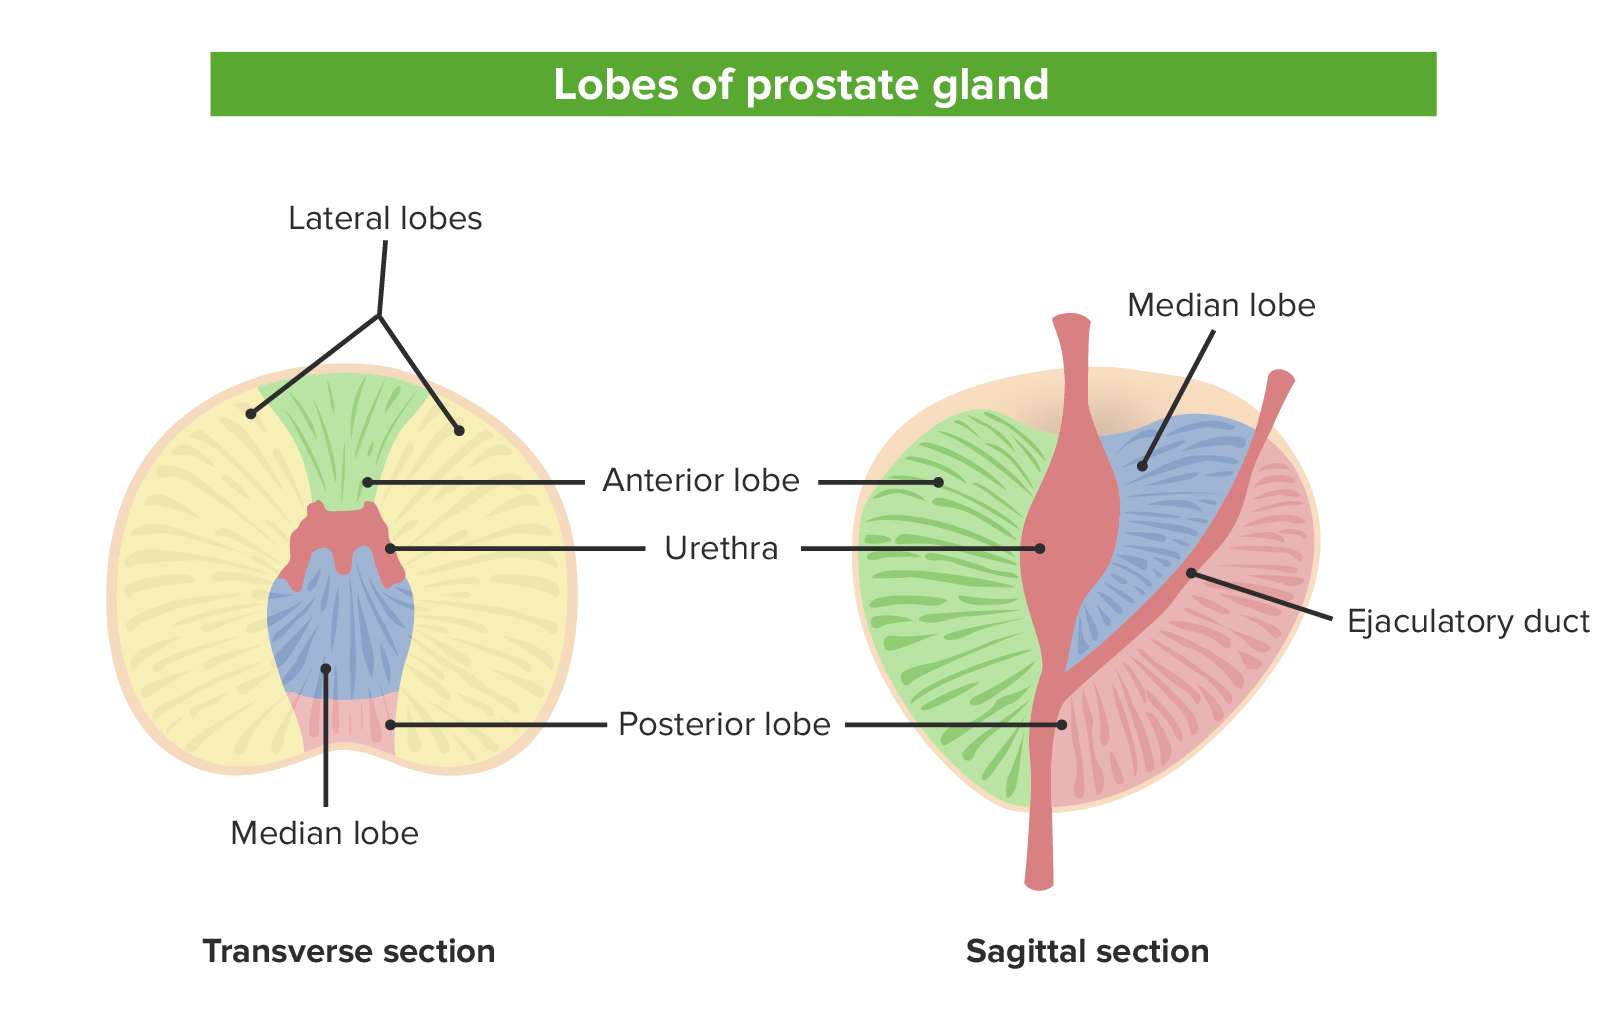 Where is the female prostate gland located